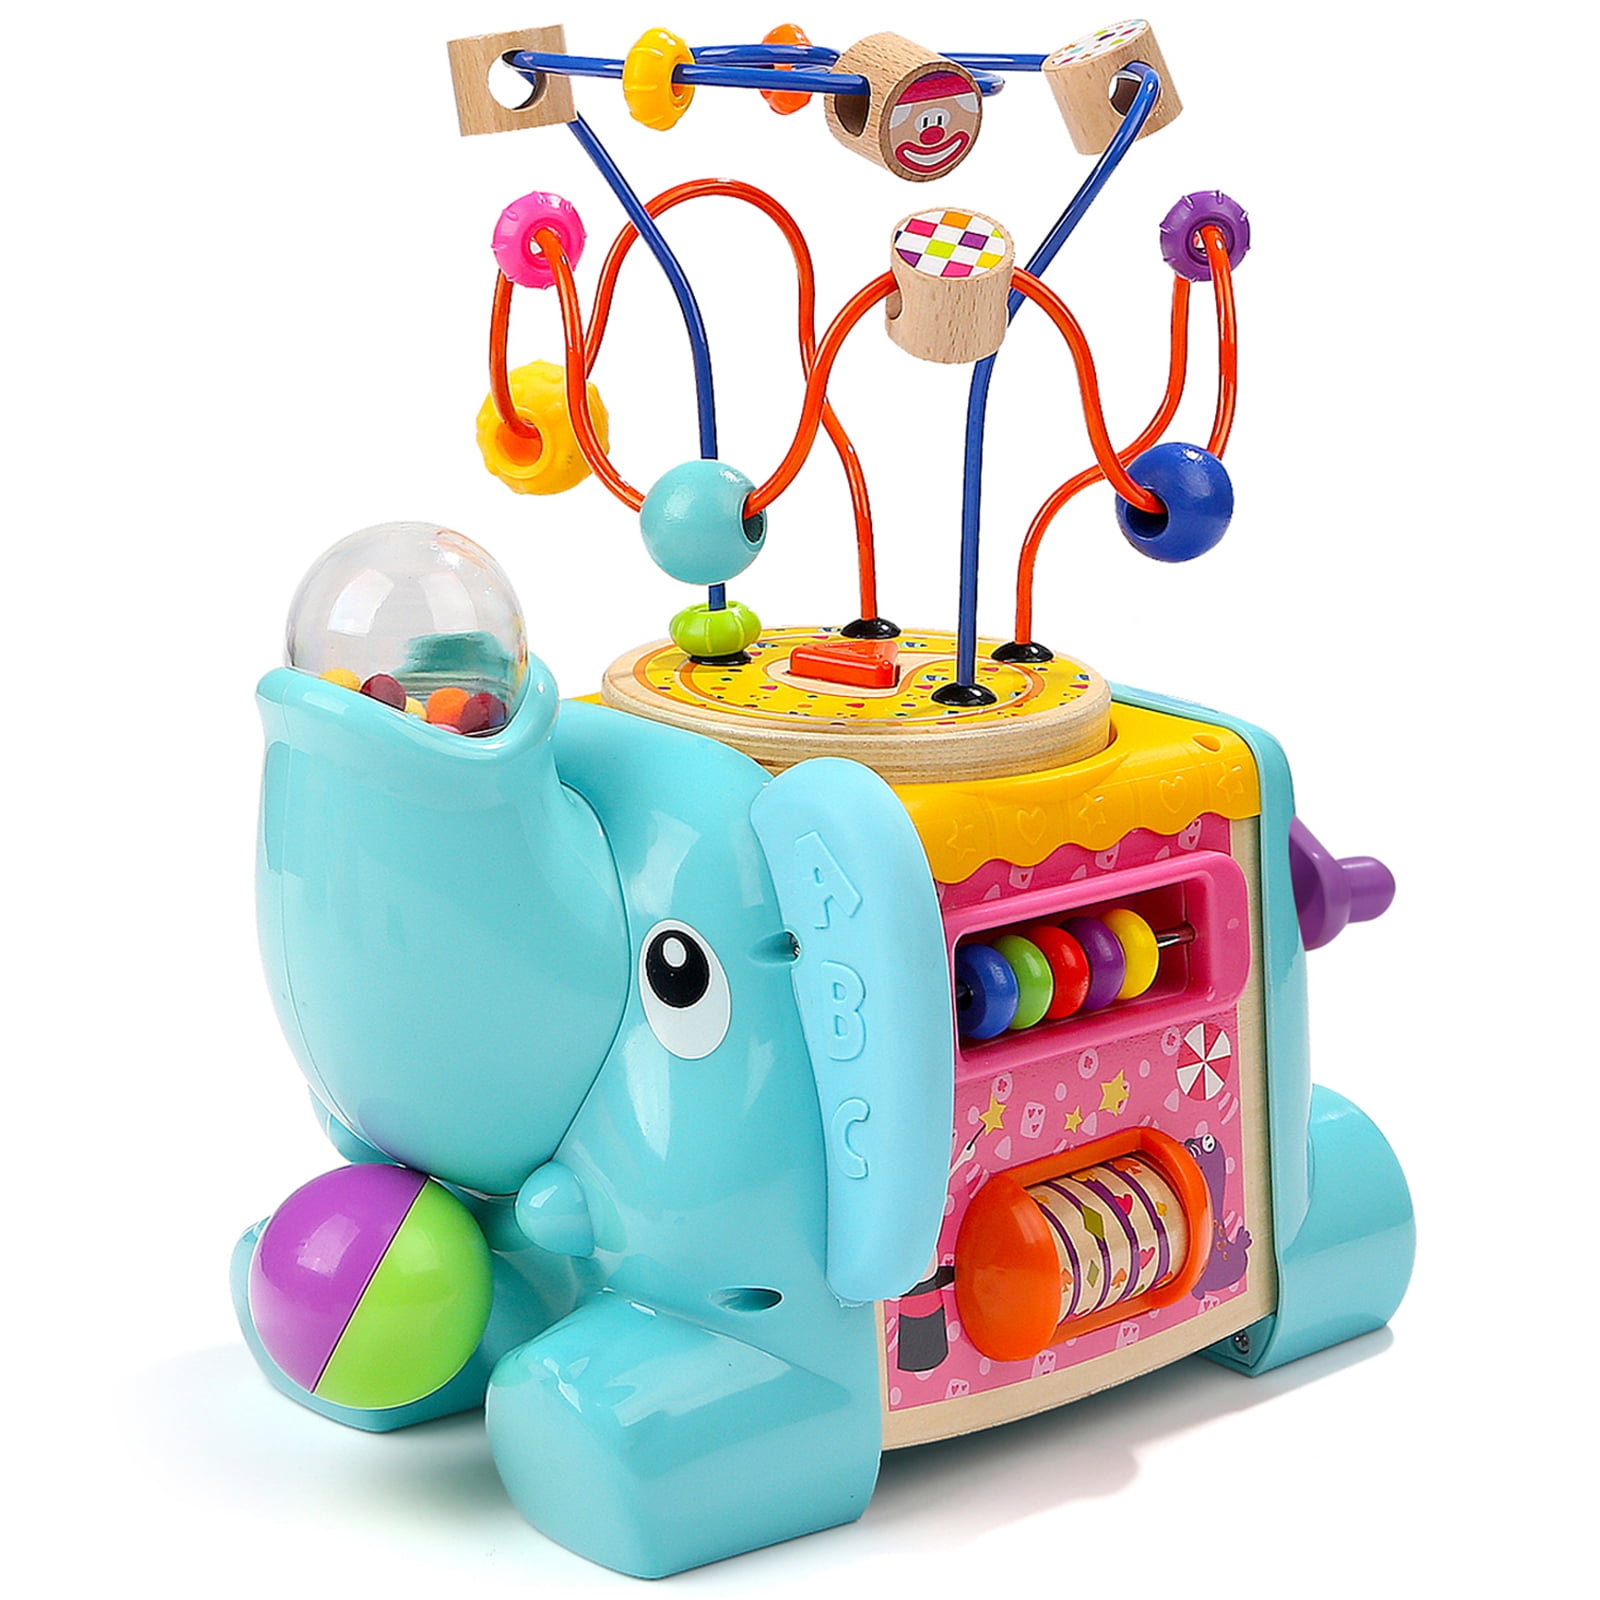 Top Bright Activity Cube Toys Baby